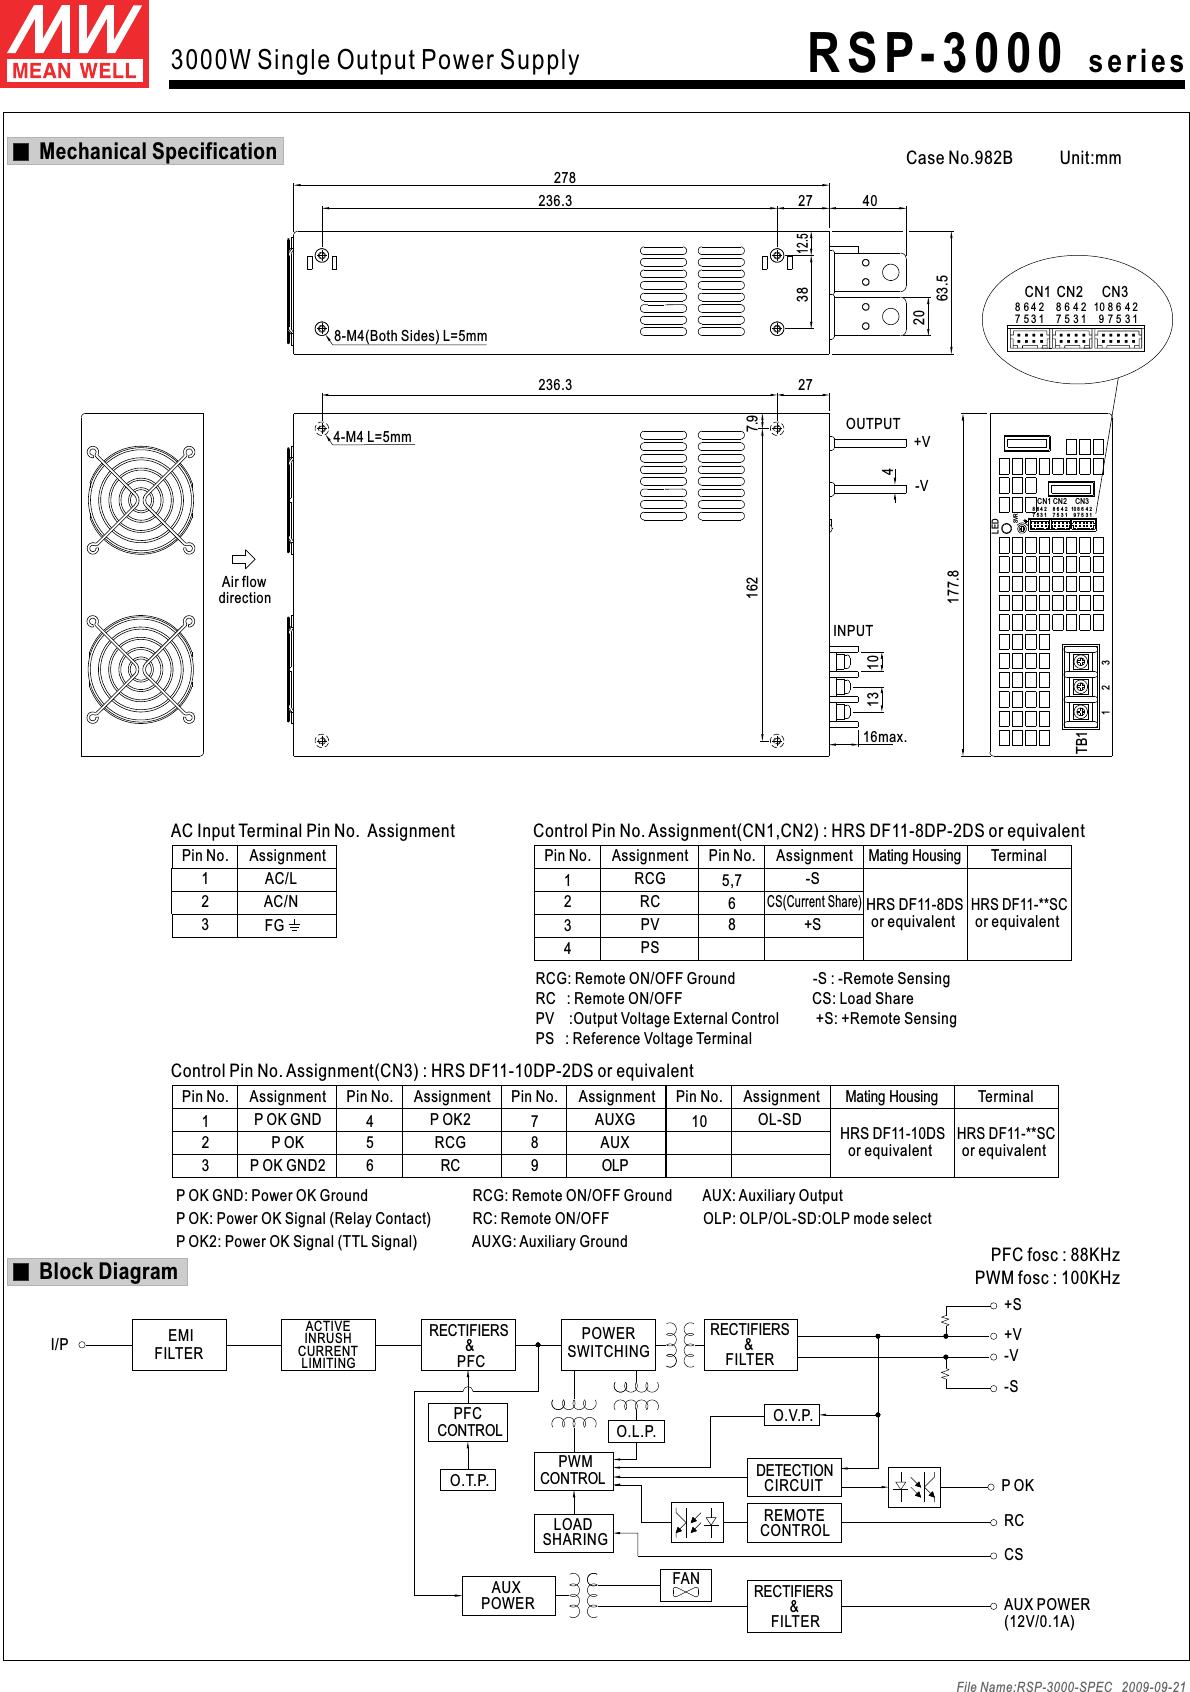 MechanicalSpecificationFileName:RSP-3000-SPEC2009-09-21ACInput TerminalPinNo. AssignmentPinNo.132AssignmentAC/NAC/LFGBlockDiagram PFCfosc:88KHzPWMfosc:100KHzFANO.V.P.-V+VRECTIFIERS&amp;FILTER-S+SCIRCUITDETECTIONPOWERAUXREMOTECONTROL RCFILTER&amp;RECTIFIERS AUXPOWER(12V/0.1A)SHARINGLOADCSP OKLIMITINGACTIVECURRENTINRUSHCONTROLI/P SWITCHINGPOWERRECTIFIERSFILTEREMIPWM&amp;PFCPFCCONTROLO.T.P.O.L.P.CaseNo.982BUnit:mm+8-M4(BothSides)L=5mm4027236.327863.5203812.5CN1CN1CN2CN2LEDSVRCN3CN3TB11 2 3177.816max.+V-VOUTPUT27236.34-M4L=5mm47.91621013directionAirflowINPUTPinNo. PinNo.2134RCG:RemoteON/OFFGroundRC:-S:-RemoteSensingRemoteON/OFFCS:LoadSharePV:OutputVoltageExternalControl+S:+RemoteSensingPS:ReferenceVoltage TerminalAssignment AssignmentRCRCGPVPSMatingHousing Terminalorequivalent orequivalent865,7+S-SCS(CurrentShare)ControlPinNo. Assignment(CN1,CN2):HRSDF11-8DP-2DS orequivalentHRSDF11-8DSHRSDF11-**SCPinNo. PinNo. PinNo. PinNo.3 6 92 5 8P OKGND:PowerOKGround RCG:RemoteON/OFFGround AUX: AuxiliaryOutputP OK:PowerOKSignal(RelayContact) RC:RemoteON/OFF OLP:OLP/OL-SD:OLP modeselectP OK2:PowerOKSignal(TTL Signal) AUXG: AuxiliaryGround1 4 7 10Assignment Assignment Assignment AssignmentP OKGND2P OKP OKGNDMatingHousing Terminalorequivalent orequivalentControlPinNo. Assignment(CN3):HRSDF11-10DP-2DS orequivalentHRSDF11-10DSHRSDF11-**SCRC OLPRCG AUXP OK2 AUXG OL-SD8866442211335577101099886644221133557788664422113355773000WSingleOutputPowerSupply R SP-30 00 s e r ies